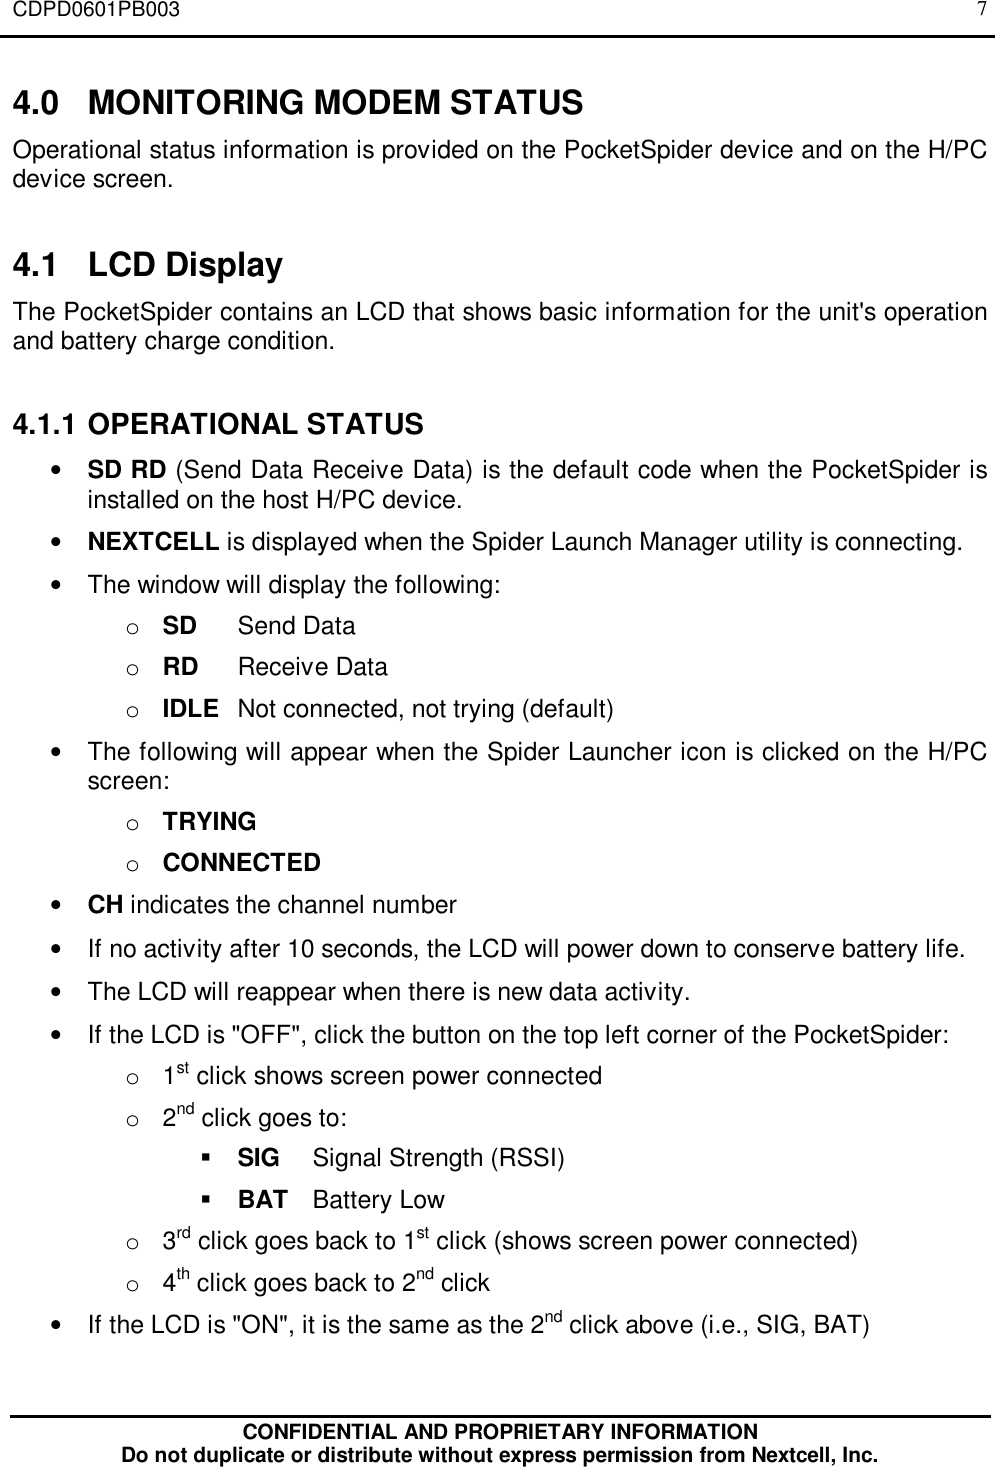 CDPD0601PB003CONFIDENTIAL AND PROPRIETARY INFORMATIONDo not duplicate or distribute without express permission from Nextcell, Inc.74.0 MONITORING MODEM STATUSOperational status information is provided on the PocketSpider device and on the H/PCdevice screen.4.1 LCD DisplayThe PocketSpider contains an LCD that shows basic information for the unit&apos;s operationand battery charge condition.4.1.1 OPERATIONAL STATUS• SD RD (Send Data Receive Data) is the default code when the PocketSpider isinstalled on the host H/PC device.• NEXTCELL is displayed when the Spider Launch Manager utility is connecting.• The window will display the following:o SD Send Datao RD Receive Datao IDLE Not connected, not trying (default)• The following will appear when the Spider Launcher icon is clicked on the H/PCscreen:o TRYINGo CONNECTED• CH indicates the channel number• If no activity after 10 seconds, the LCD will power down to conserve battery life.• The LCD will reappear when there is new data activity.• If the LCD is &quot;OFF&quot;, click the button on the top left corner of the PocketSpider:o 1st click shows screen power connectedo 2nd click goes to:§ SIG Signal Strength (RSSI)§ BAT Battery Lowo 3rd click goes back to 1st click (shows screen power connected)o 4th click goes back to 2nd click• If the LCD is &quot;ON&quot;, it is the same as the 2nd click above (i.e., SIG, BAT)